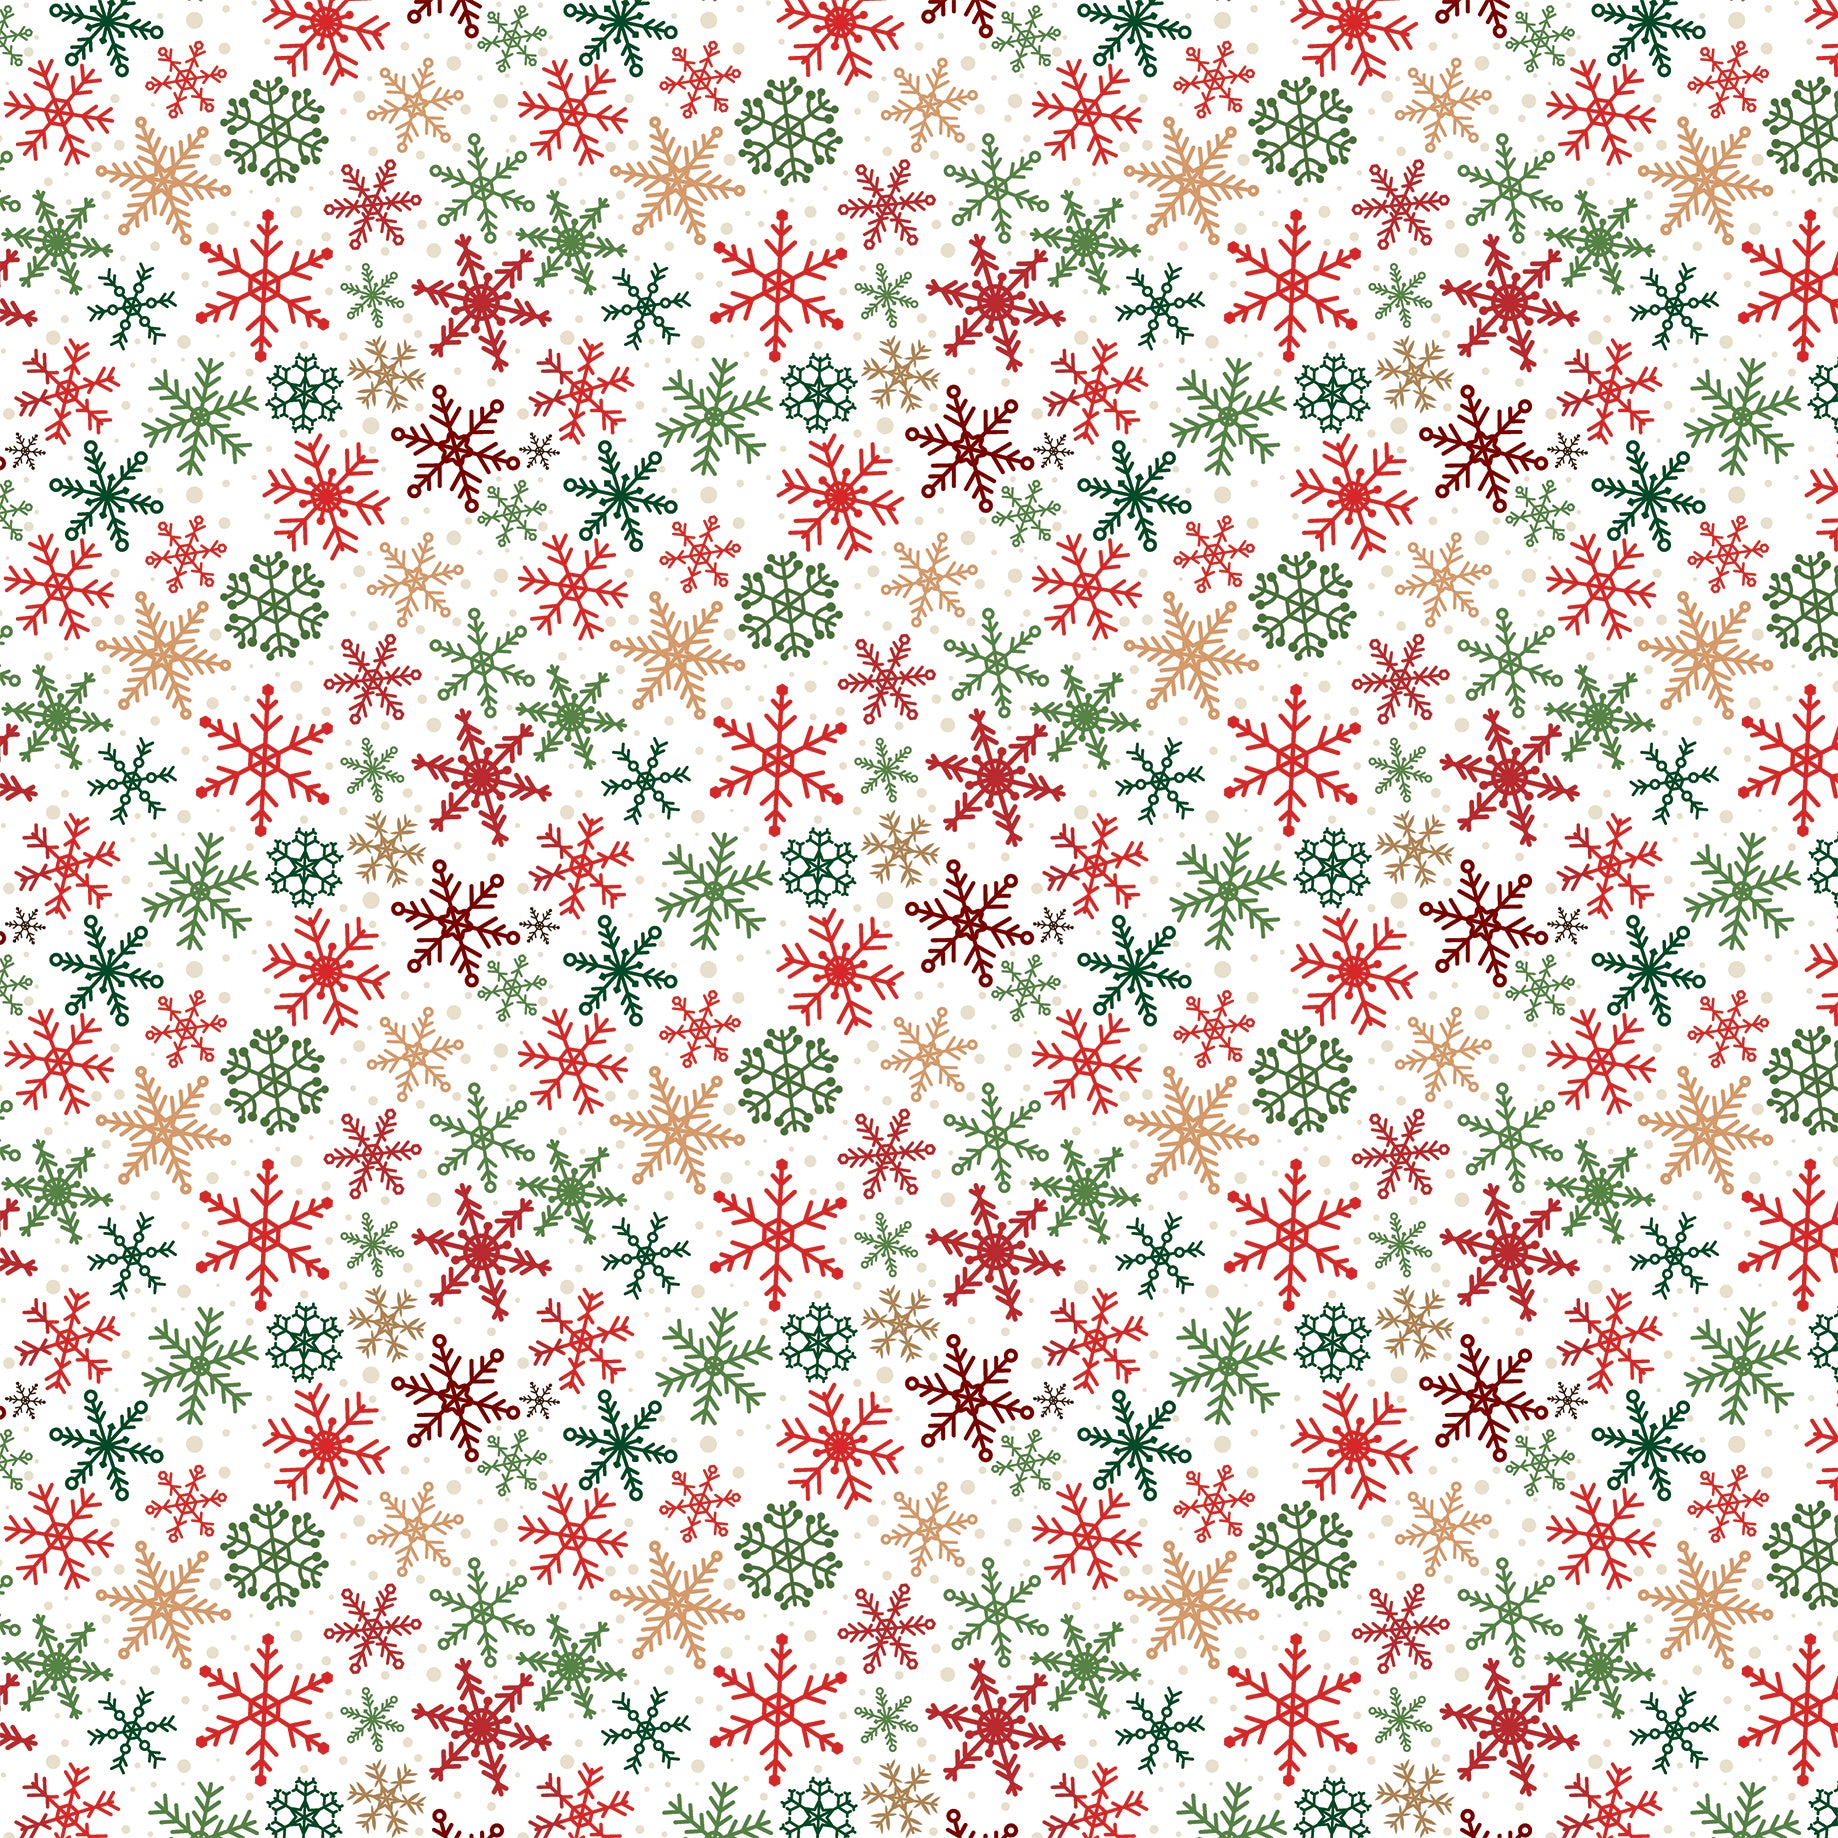 Have A Holly Jolly Christmas Collection Snowflake Sweets 12 x 12 Double-Sided Scrapbook Paper by Echo Park Paper